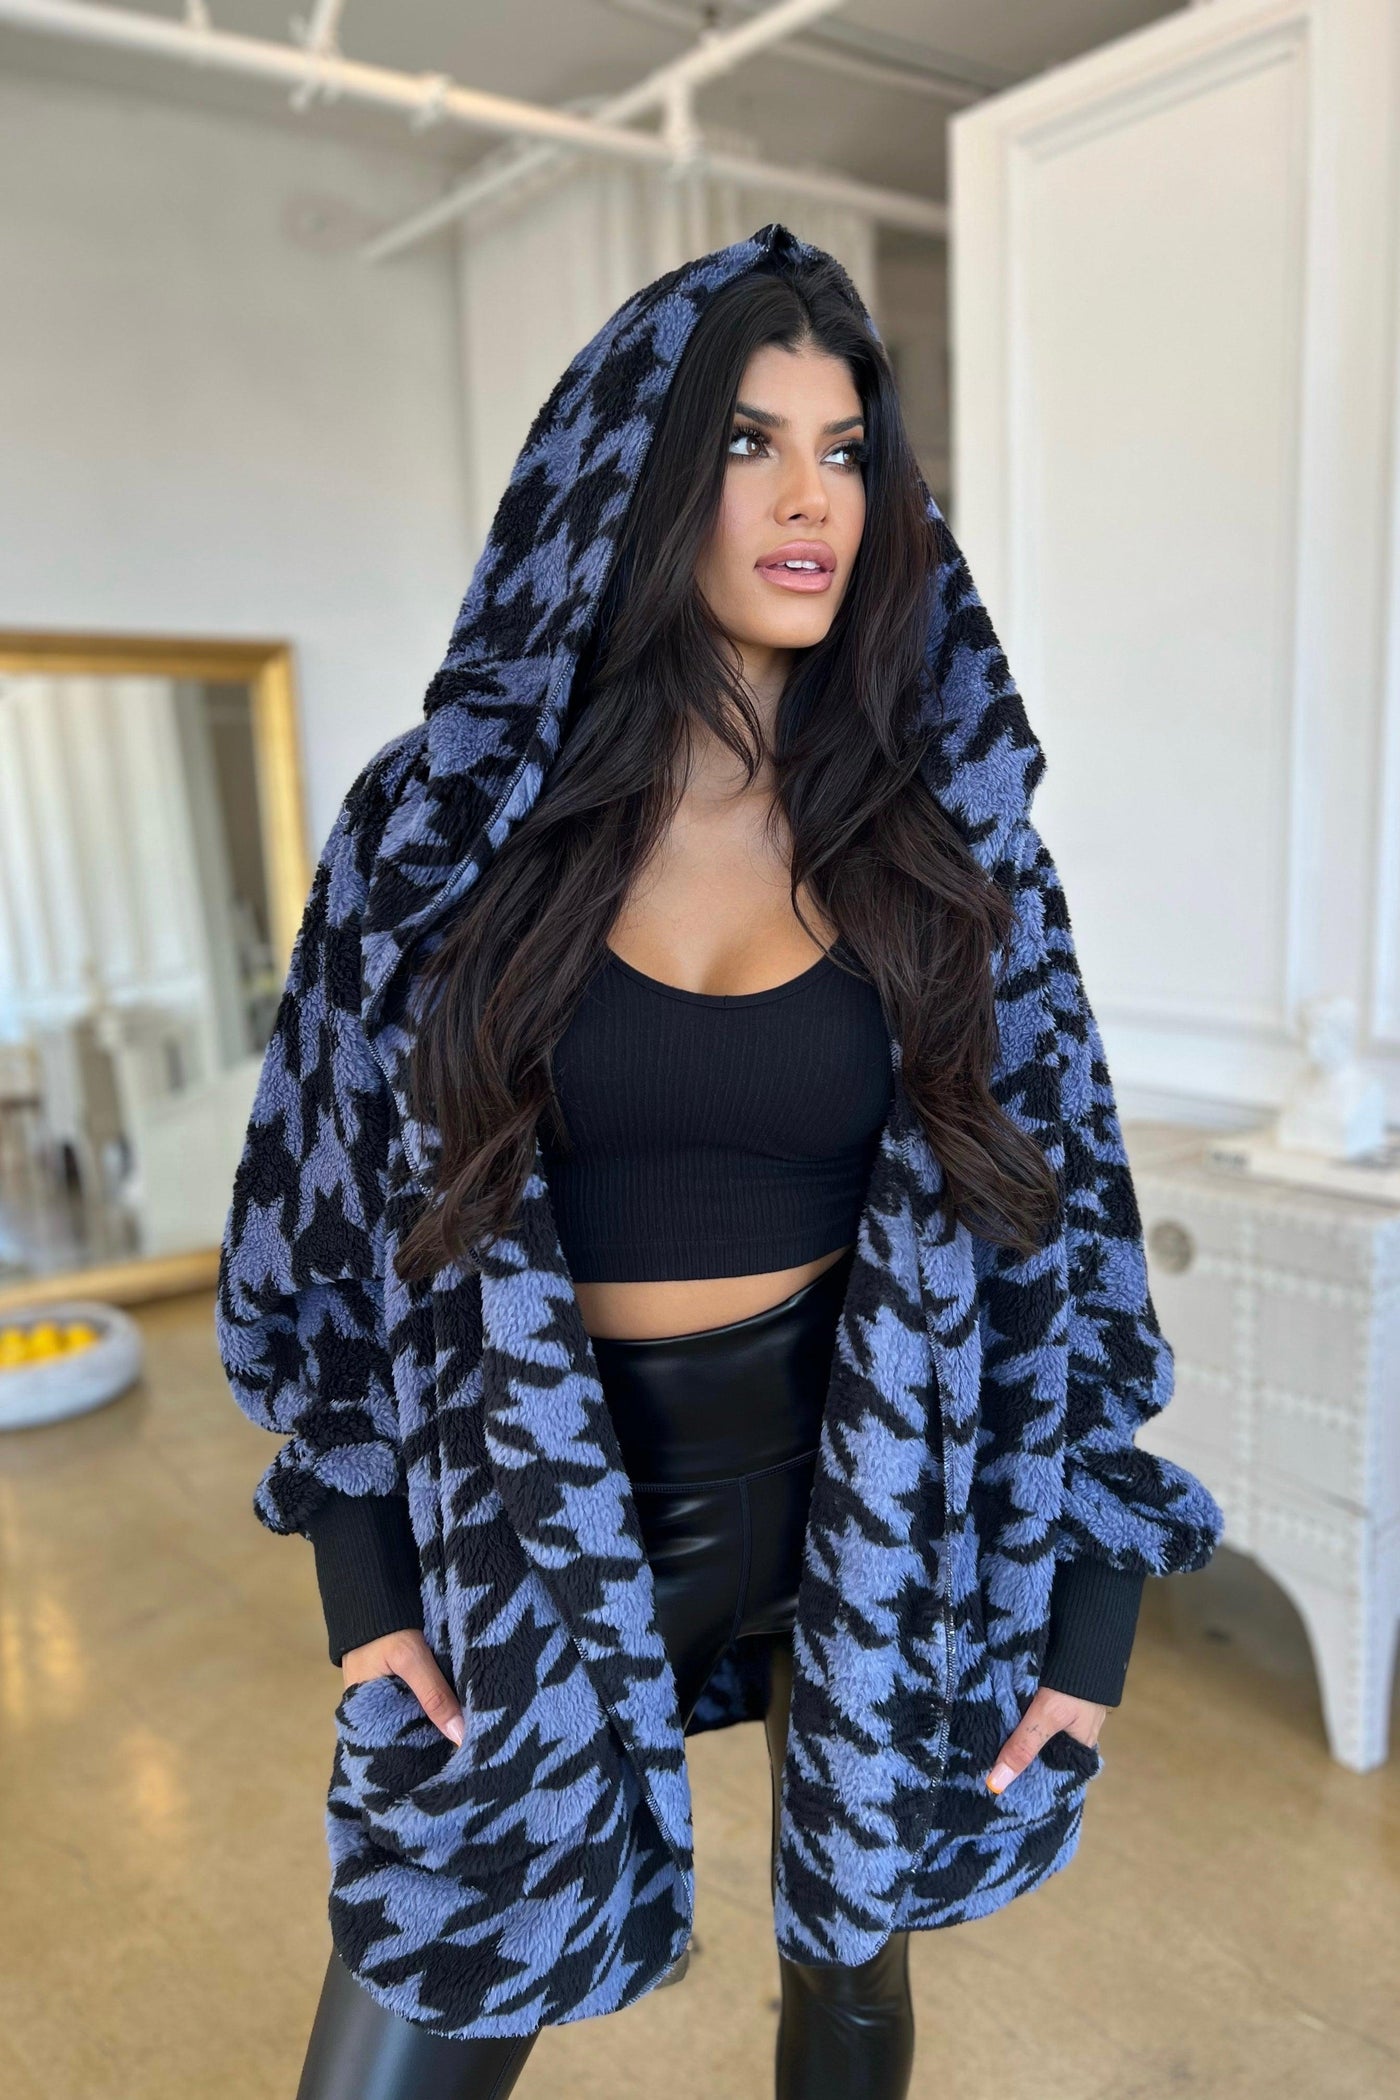 HOUNDSTOOTH TEDDY BEAR JACKET , Vests , it’sNOMB. The Label , barefoot dreams jackets, CAMO, CAMOUFLAGE, cozy jackets, FALL, fall jackets, fall sweaters, faux fur, houndstooth teddy bear jacket, it's nomb the label, ITS NOMB, Its None of My Business, ITSNOMB, ITSNOMBTHELABEL, Jessica Nickson, Maternity Friendly, sherpa hooded jacket, sweater, sweaters, TEDDY BEAR, TEDDY BEAR JACKET, teddy bear jackets, winter jackets , It's NOMB , itsnomb.com